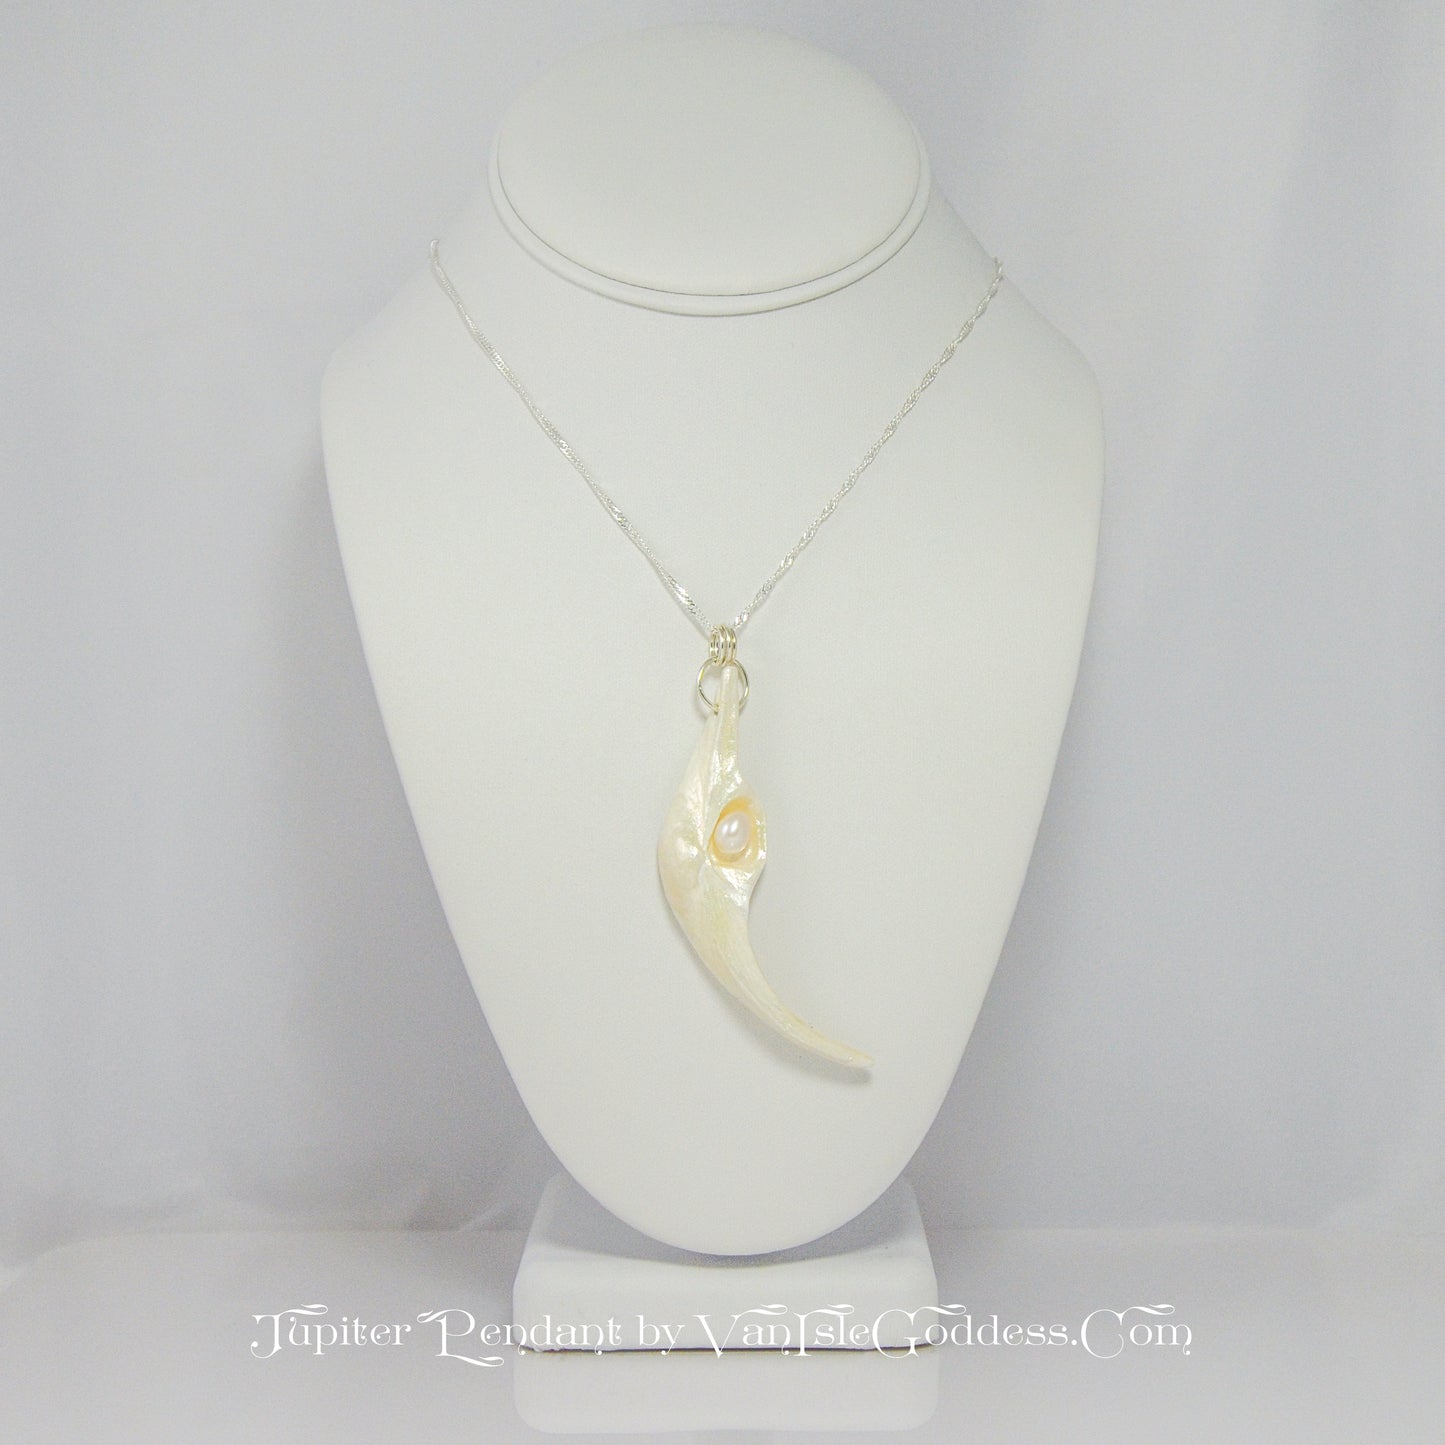 Jupiter is a natural seashell pendant with a real freshwater pearl. The pendant is shown on a white necklace displayer.